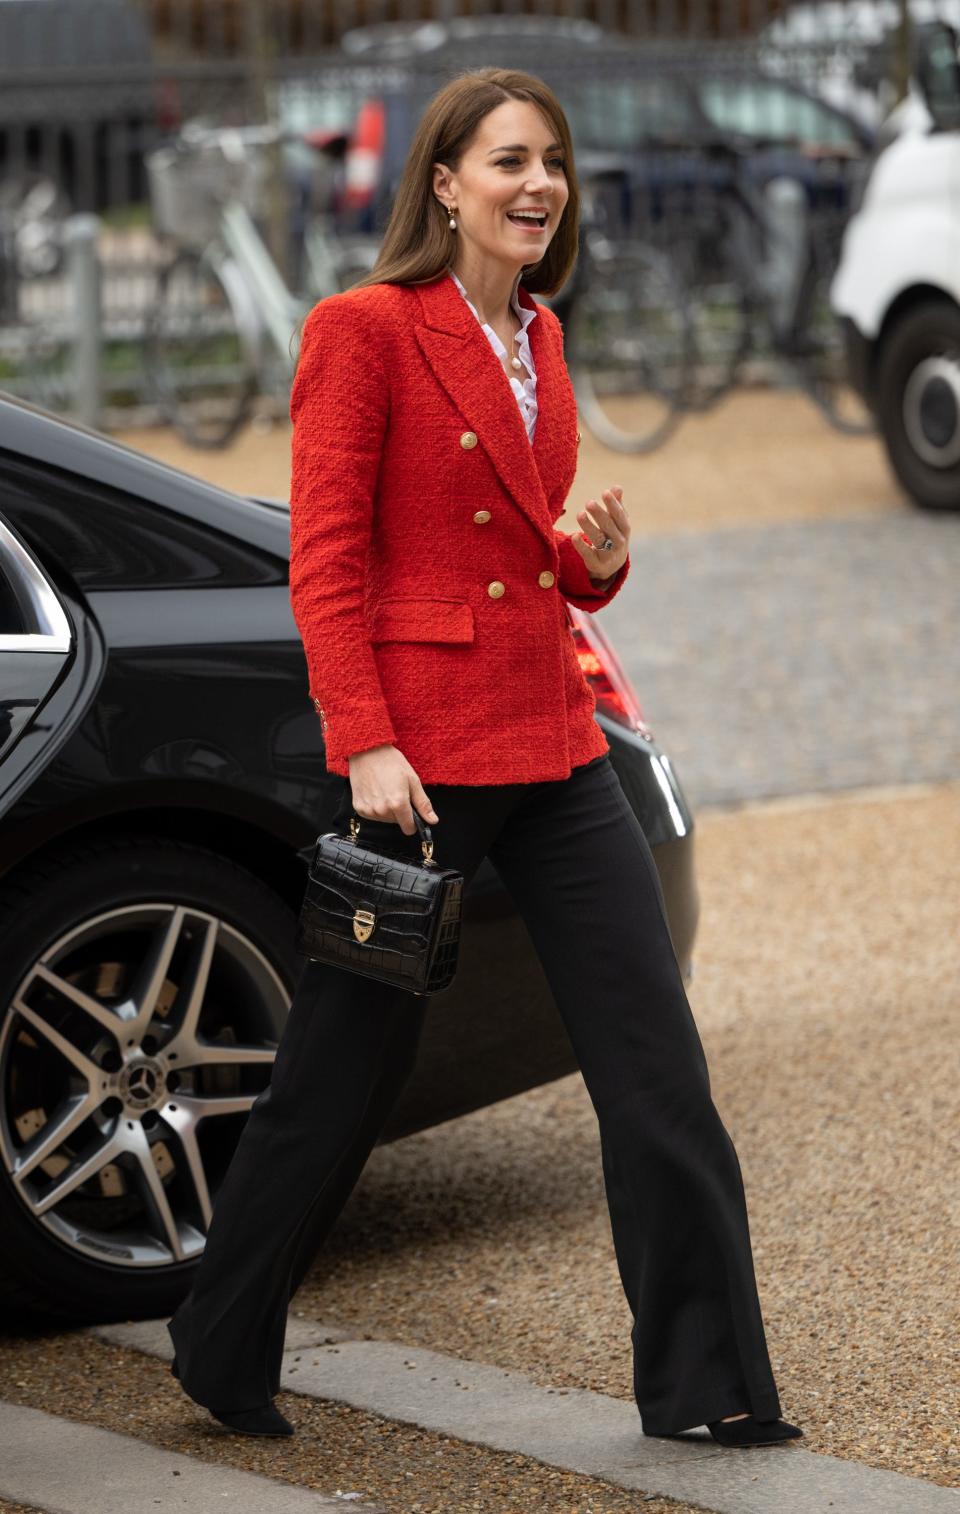 Middleton wore the red Zara dress as a homage to the Danish flag during a visit to Denmark.